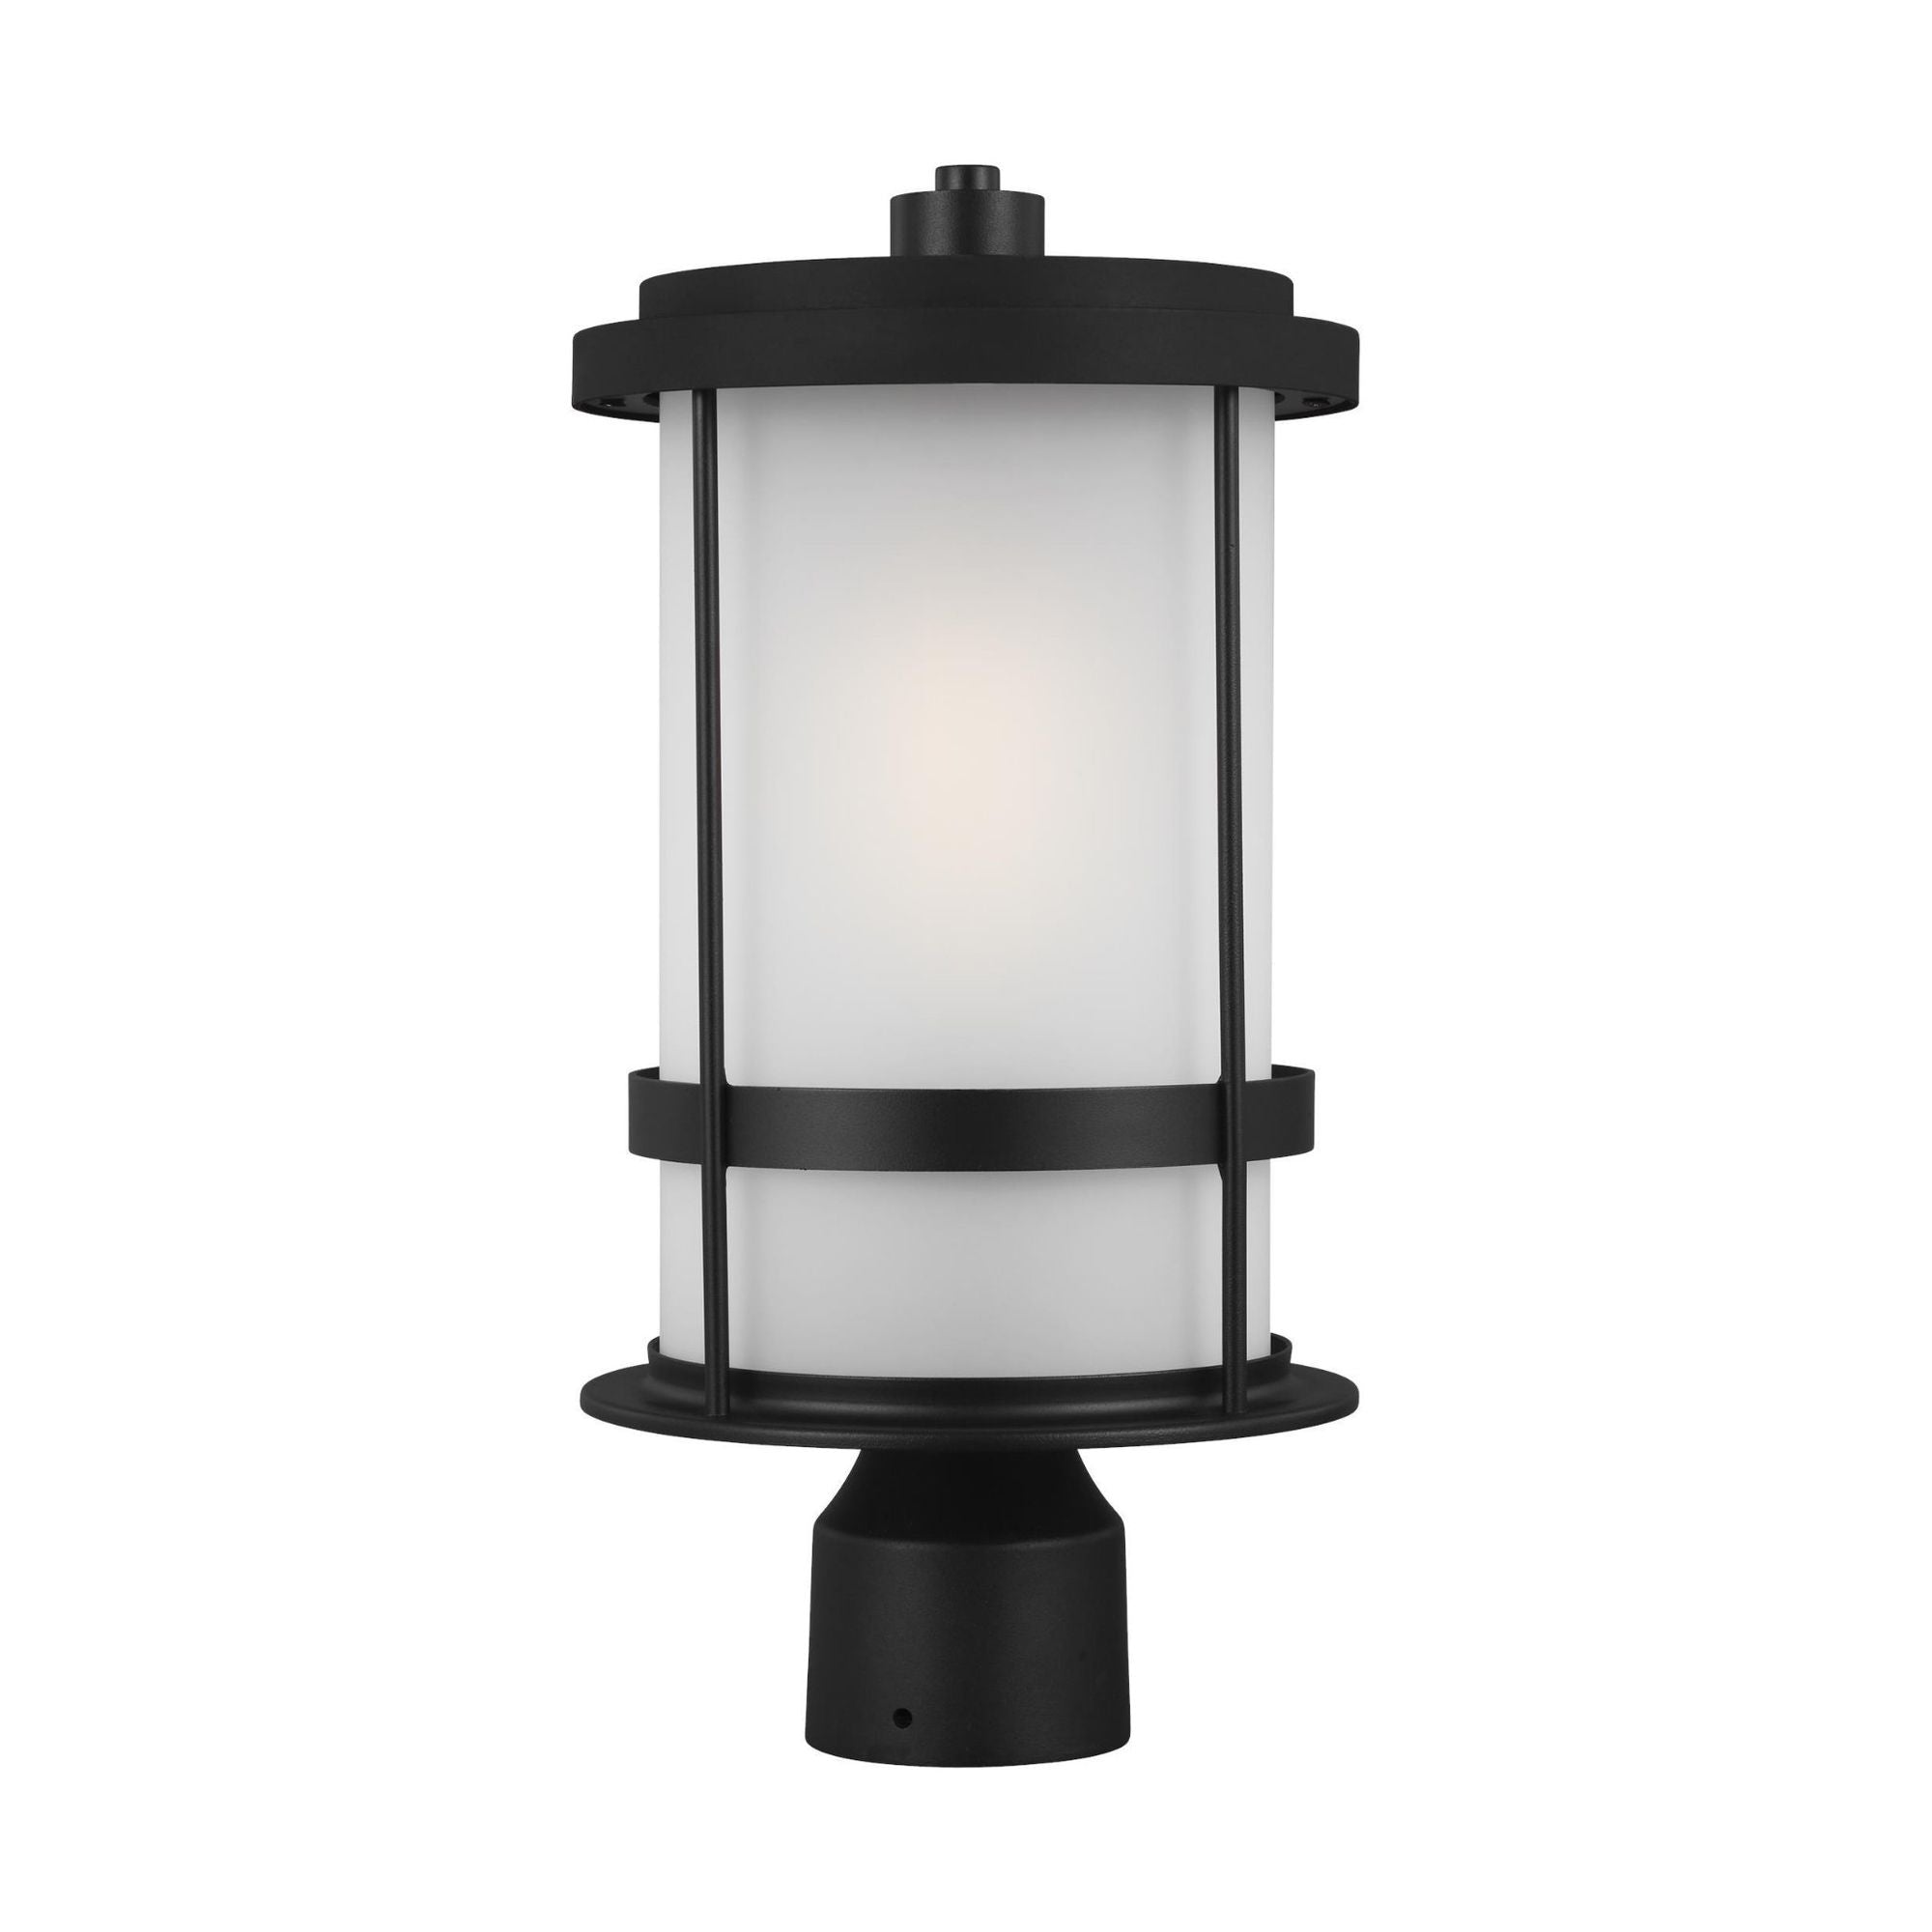 Wilburn One Light Outdoor Post Lantern LED Transitional Fixture 16.125" Height Aluminum Round Satin Etched Shade in Black